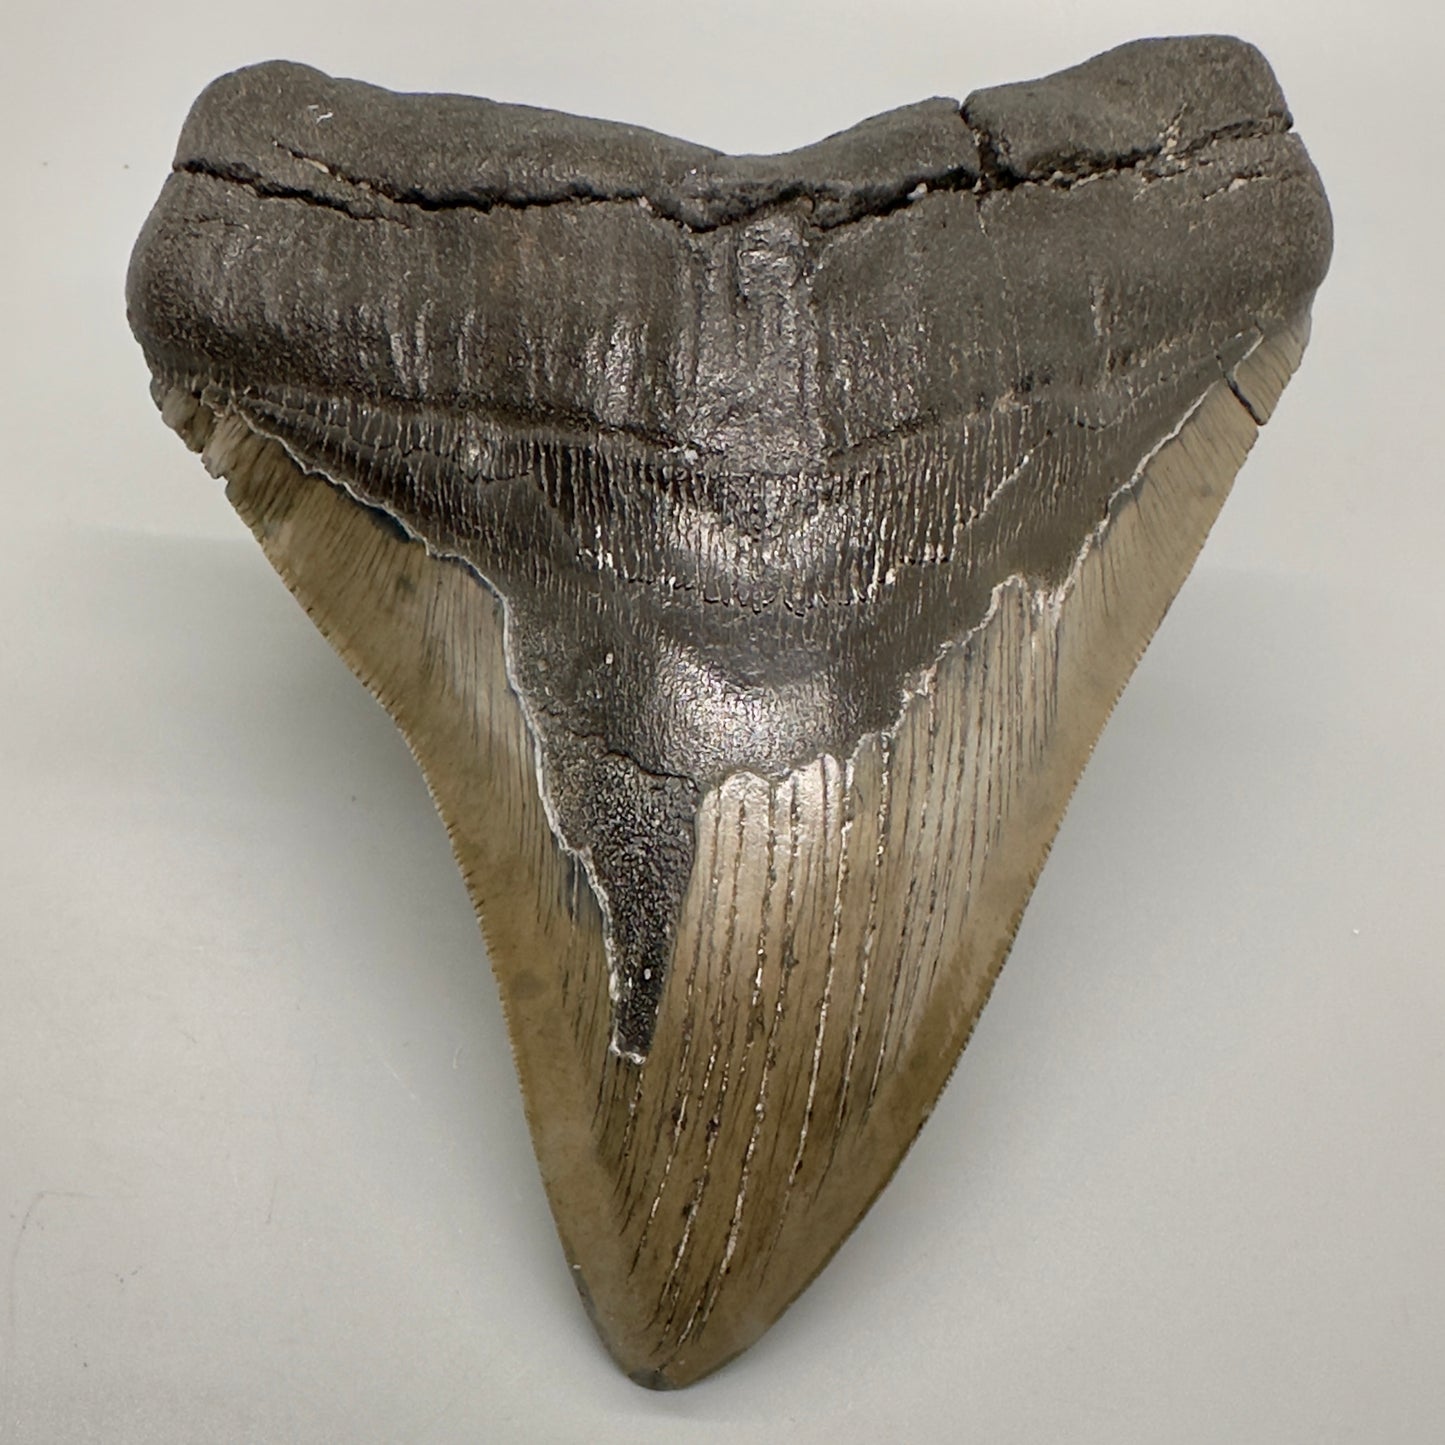 EXTRA LARGE 6.05" Fossil Megalodon Tooth: Scuba Diving Discovery from Southeast USA CM4606 - Front down